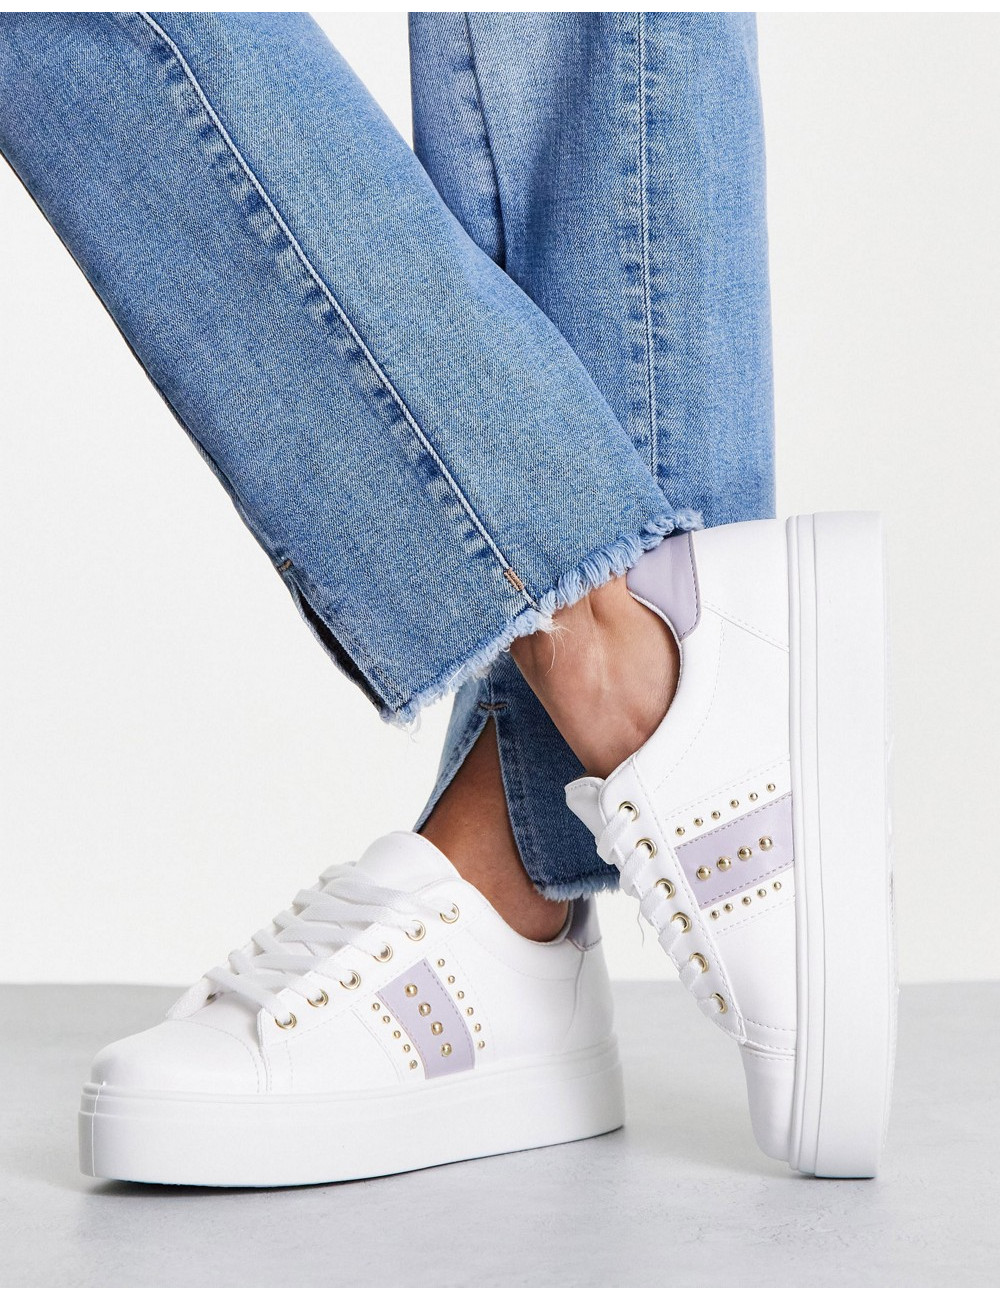 Topshop Clementine studded...